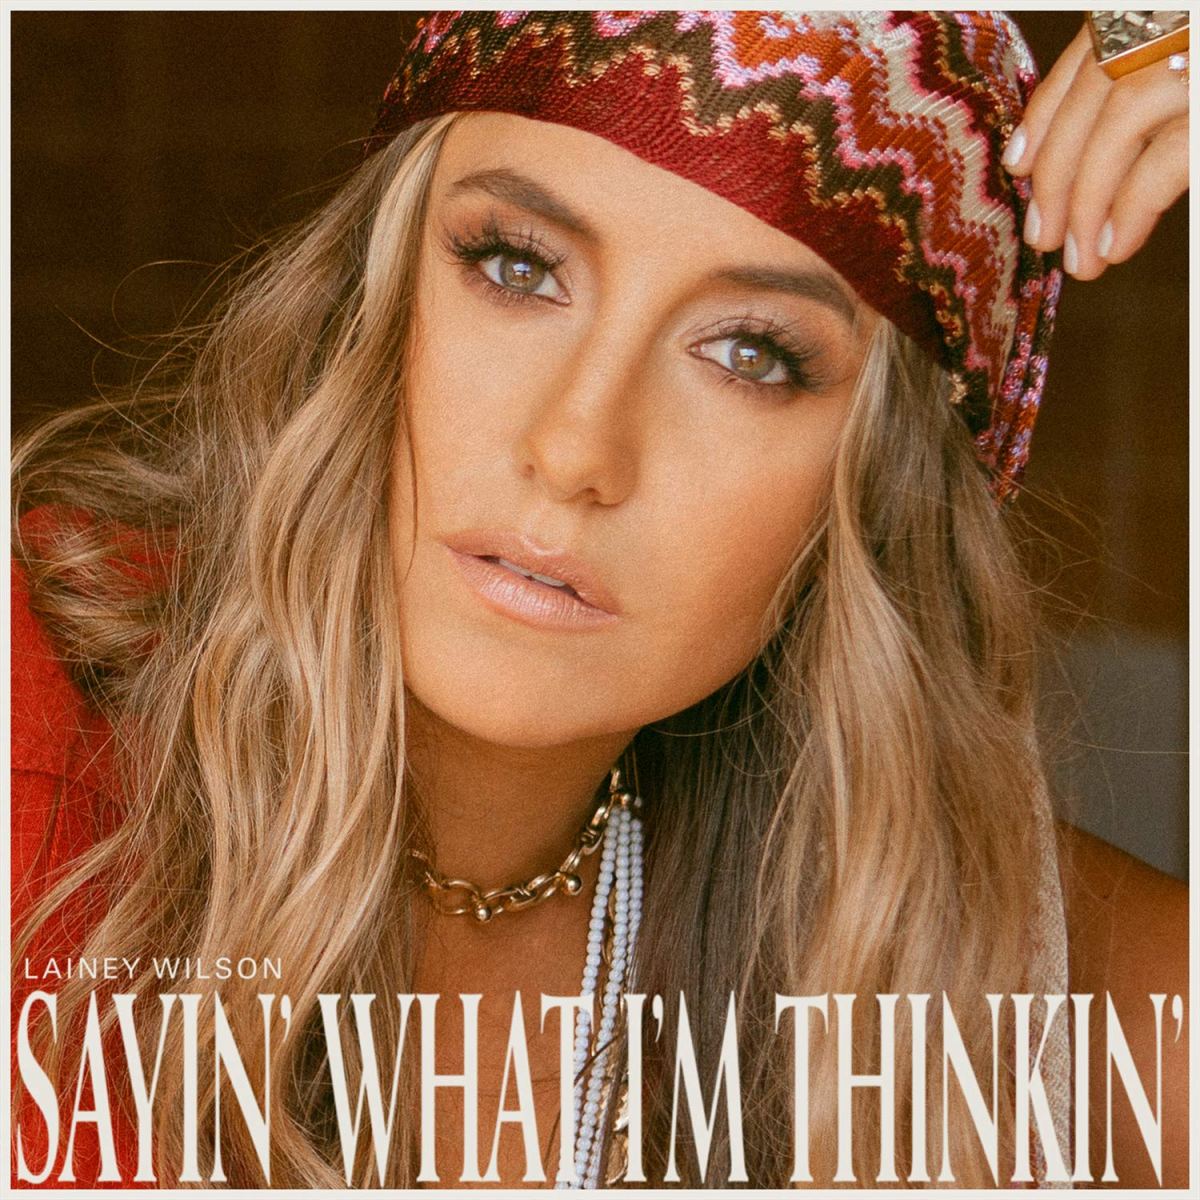 Lainey Wilson (Sayin' What I'm Thinkin') Album Cover Poster Lost Posters